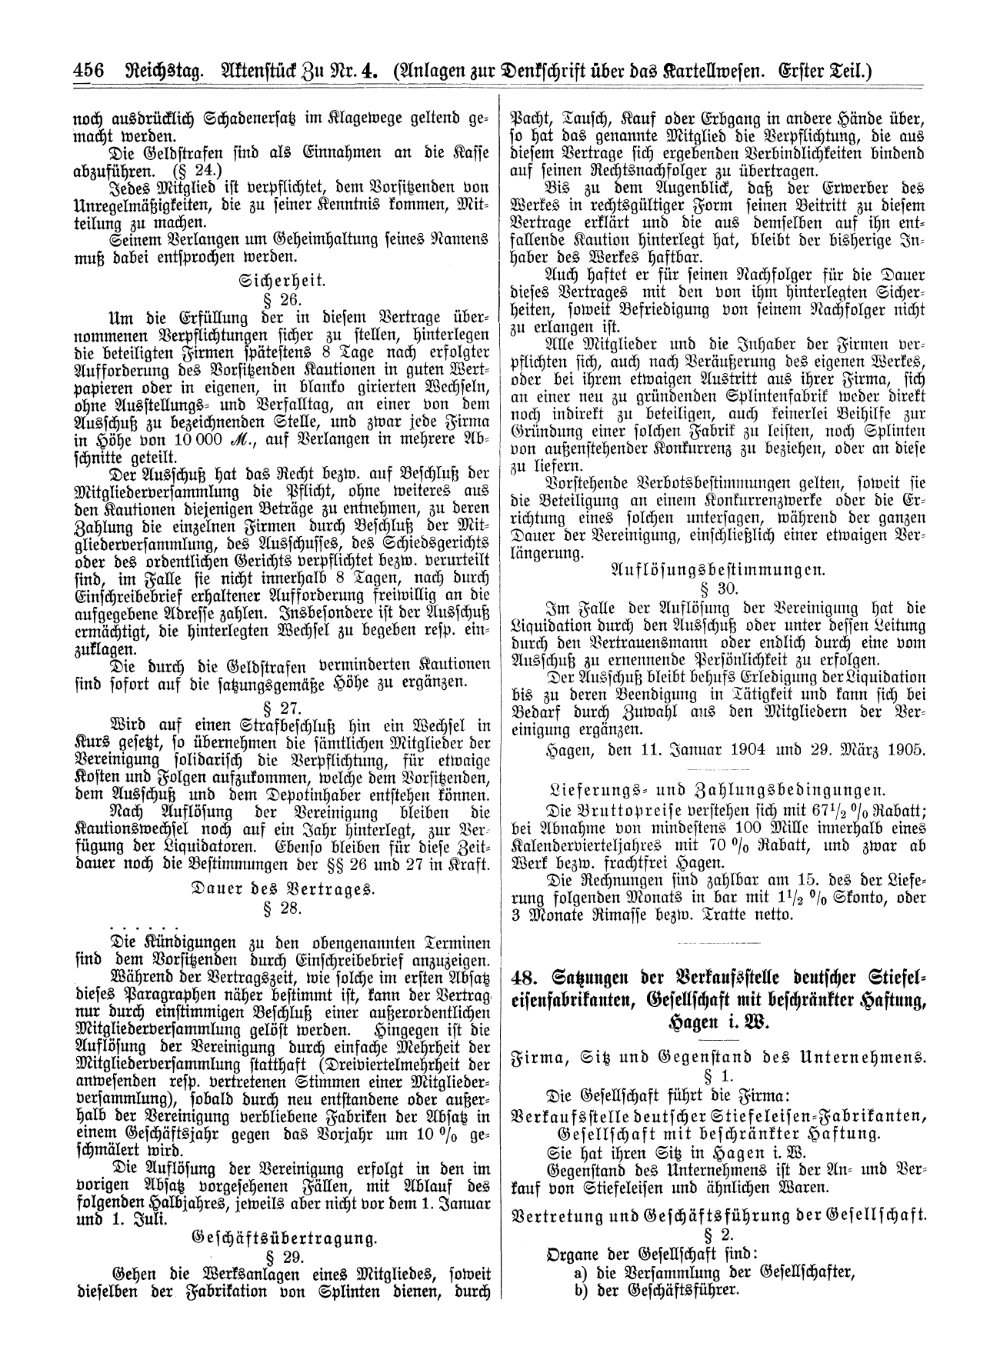 Scan of page 456